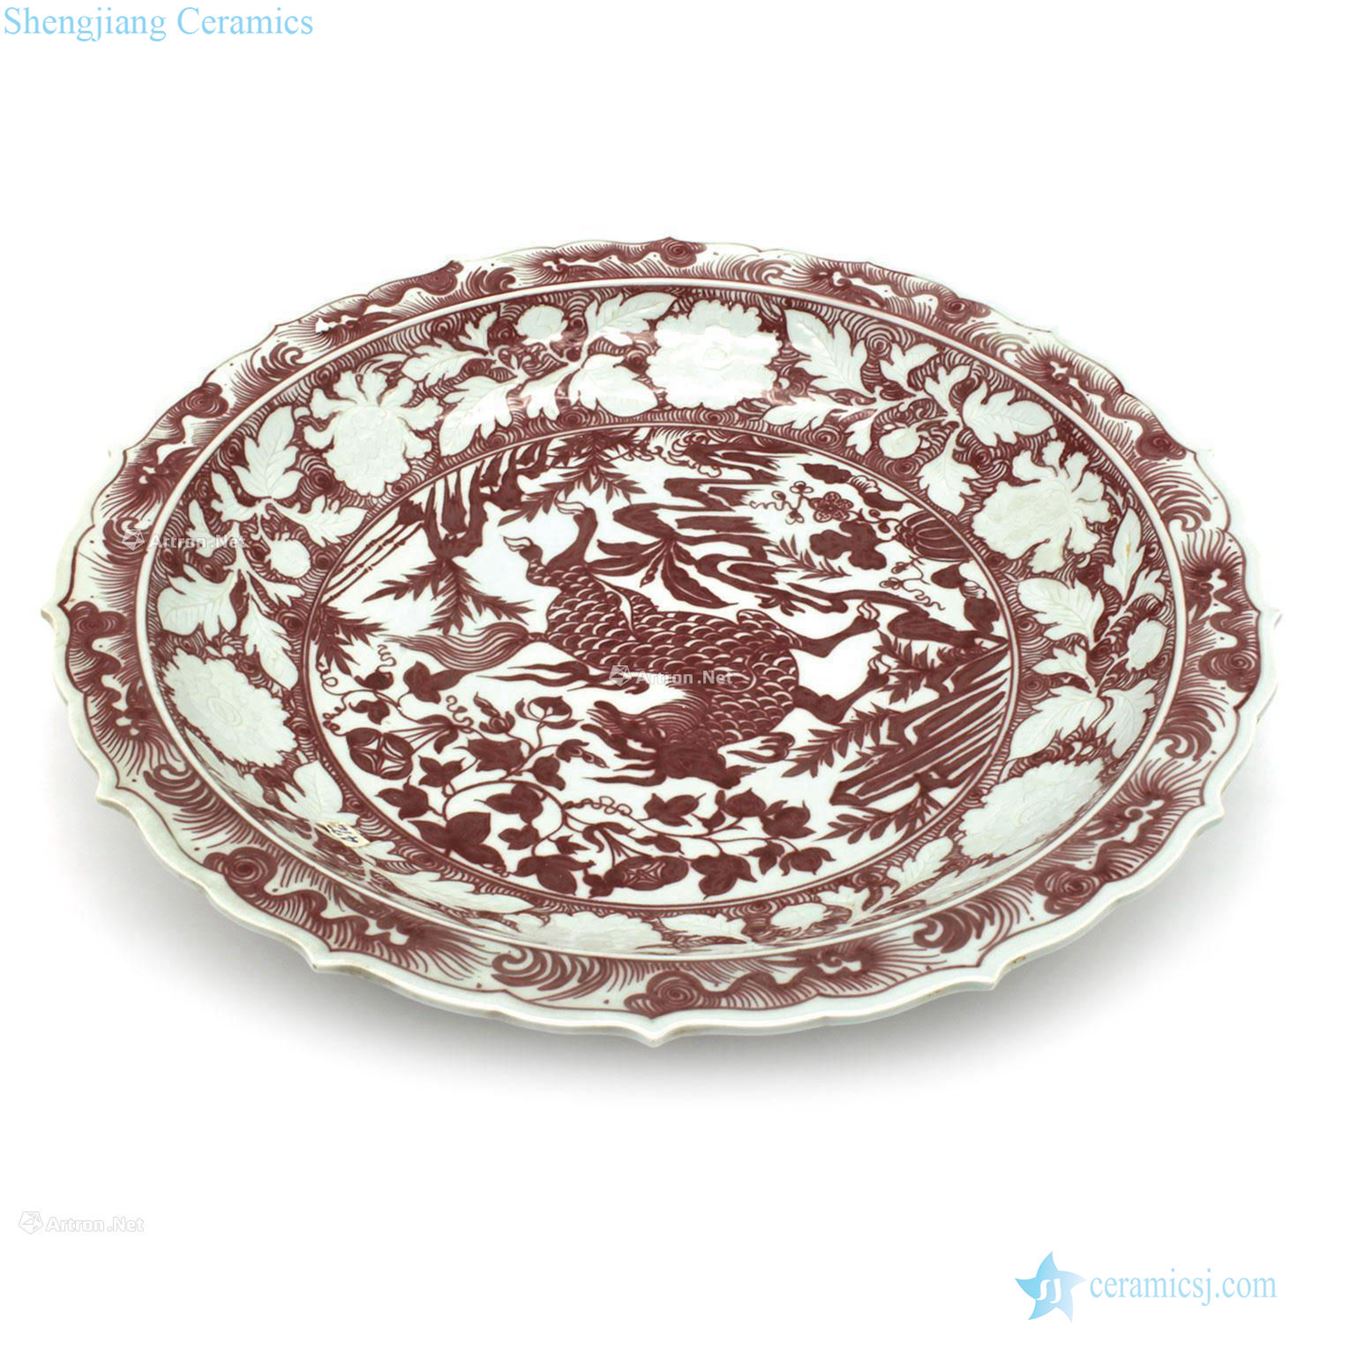 In the Ming dynasty Youligong red peony kirin kwai plate